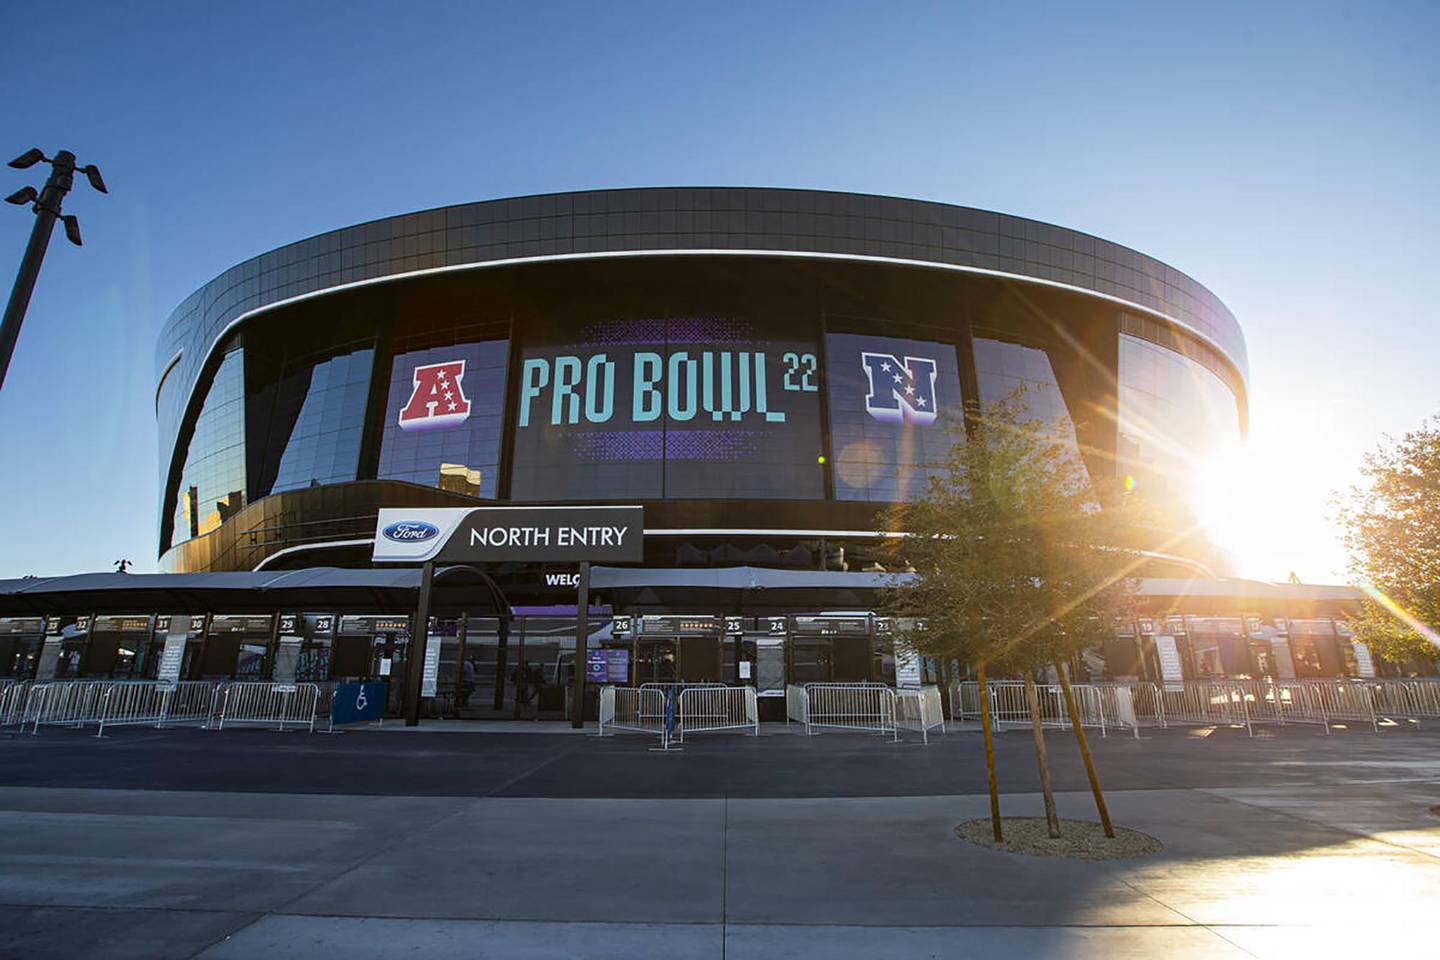 Signage for the Pro Bowl is seen at Allegiant Stadium on Feb. 6, 2022, in Las Vegas.